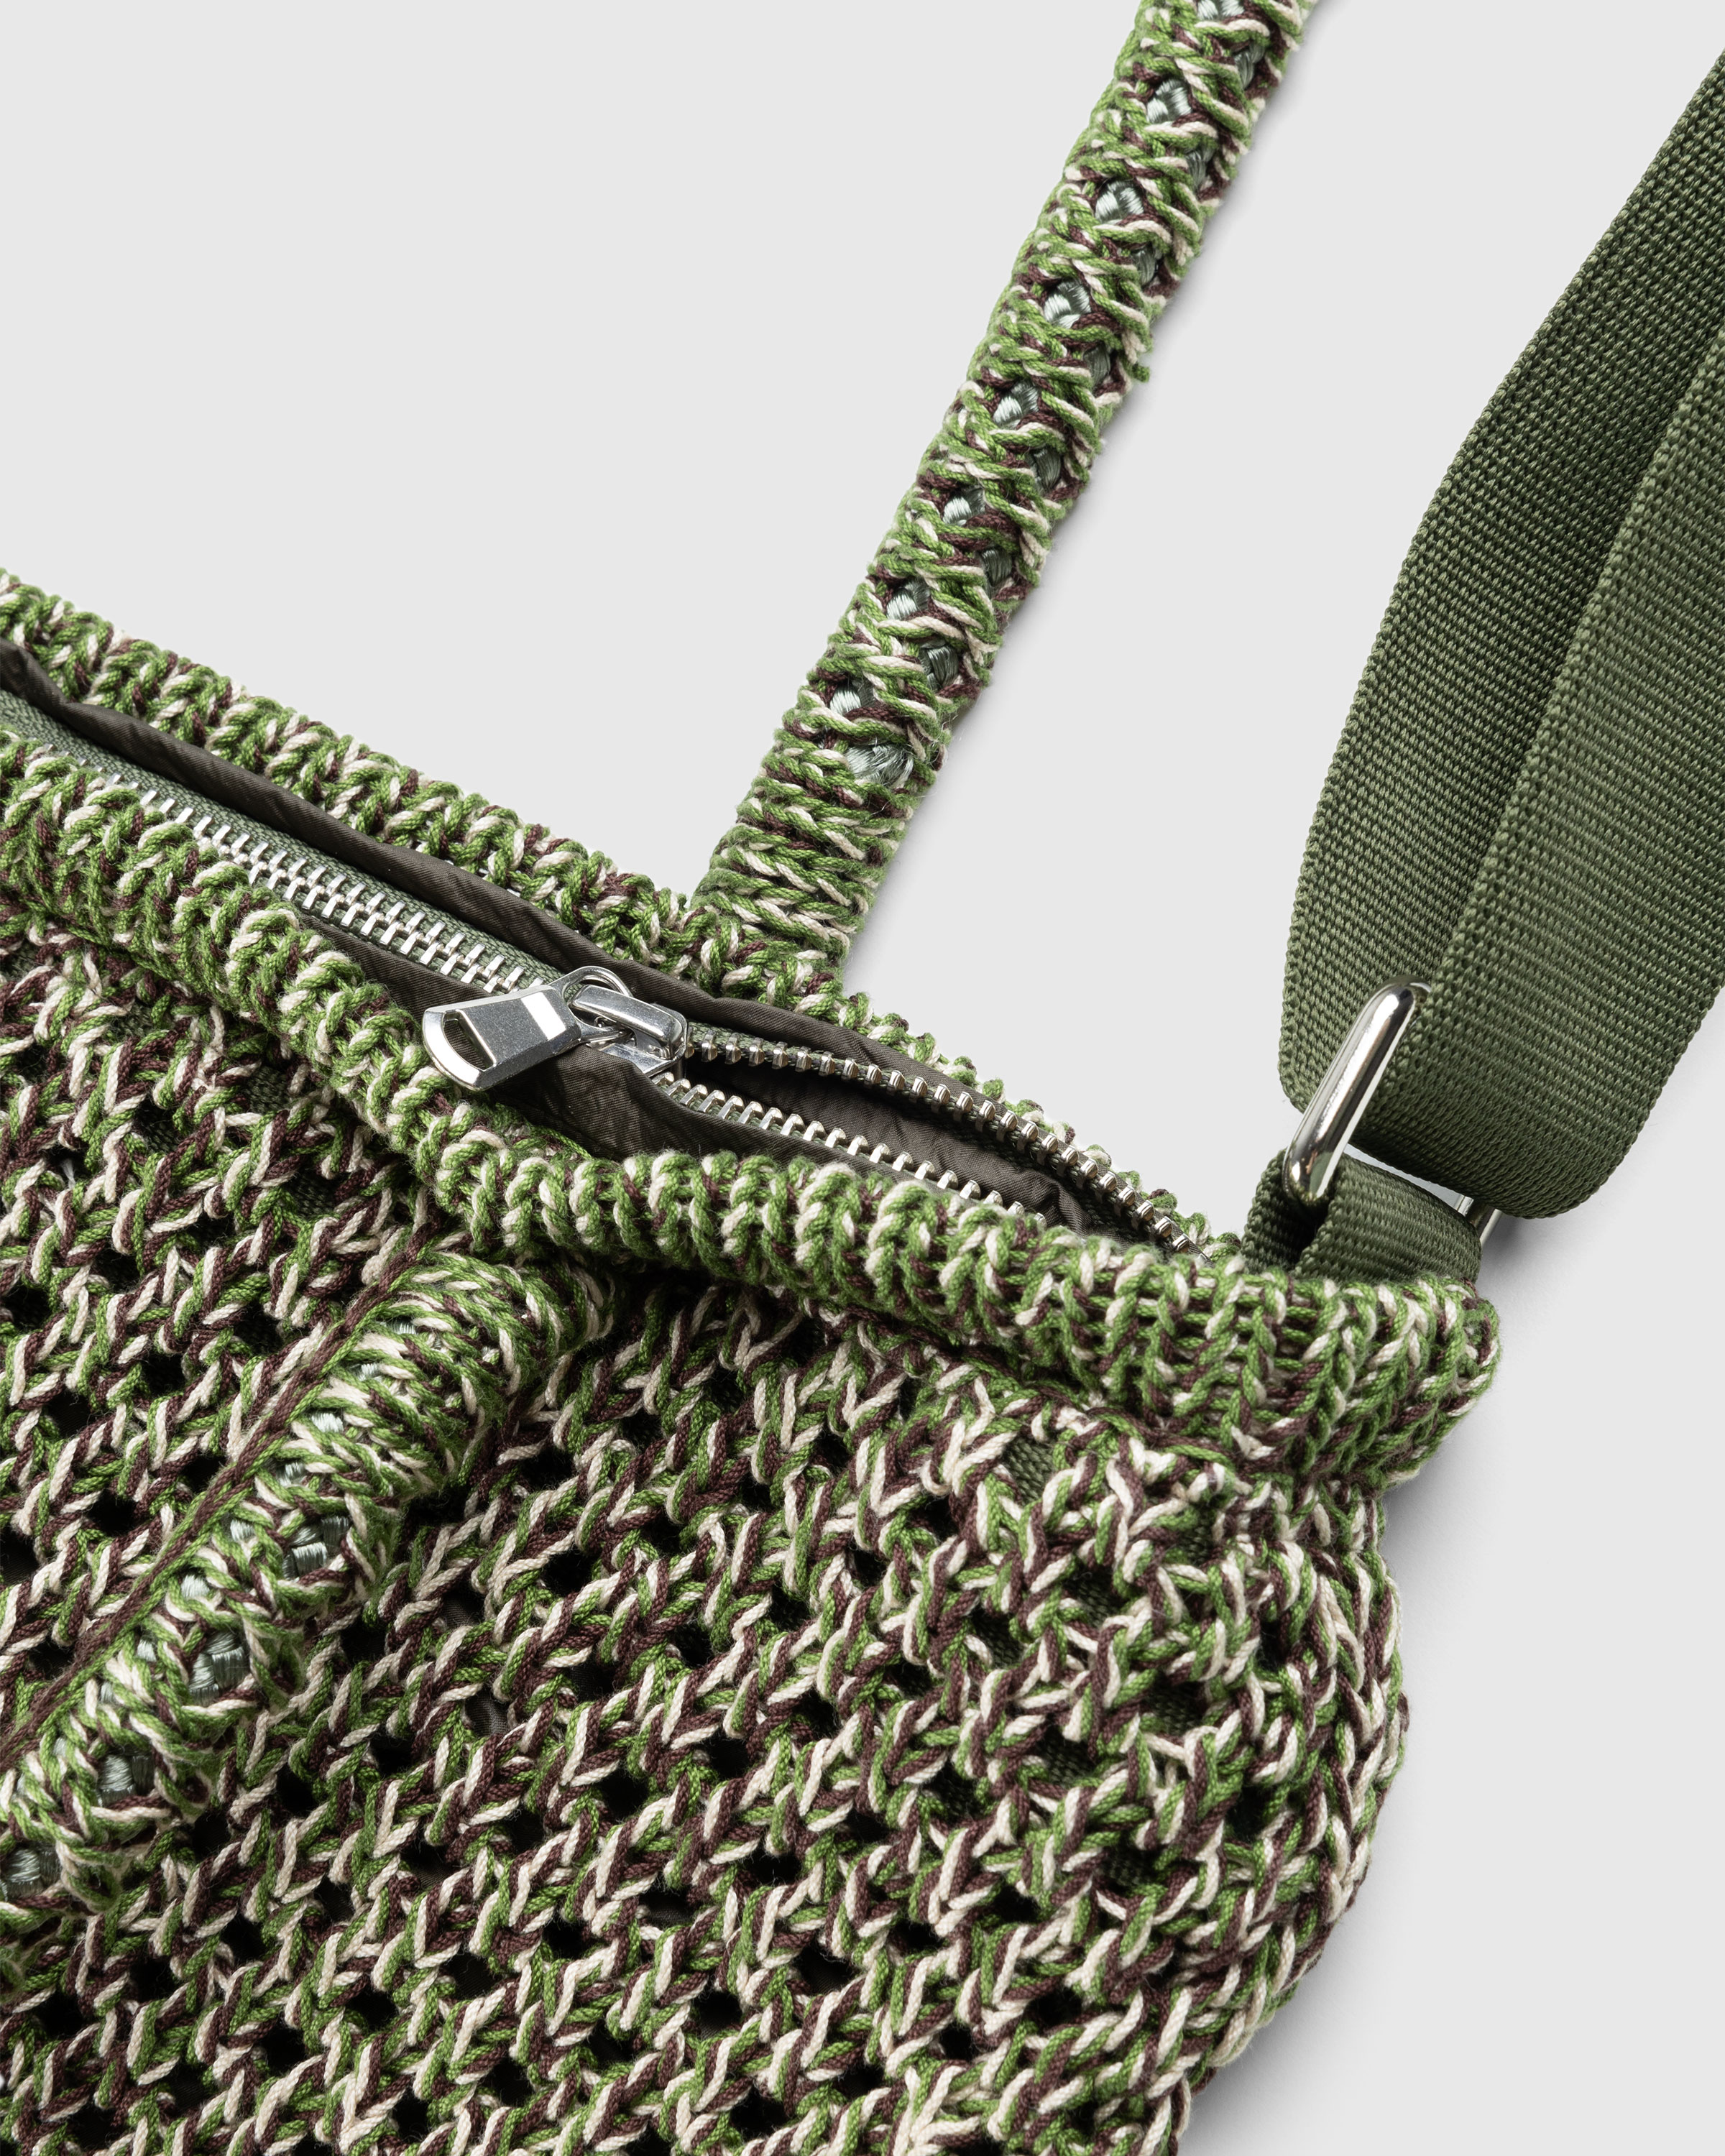 SSU – Knitted Mesh Work Tote Classic Camo - Tote Bags - Green - Image 4